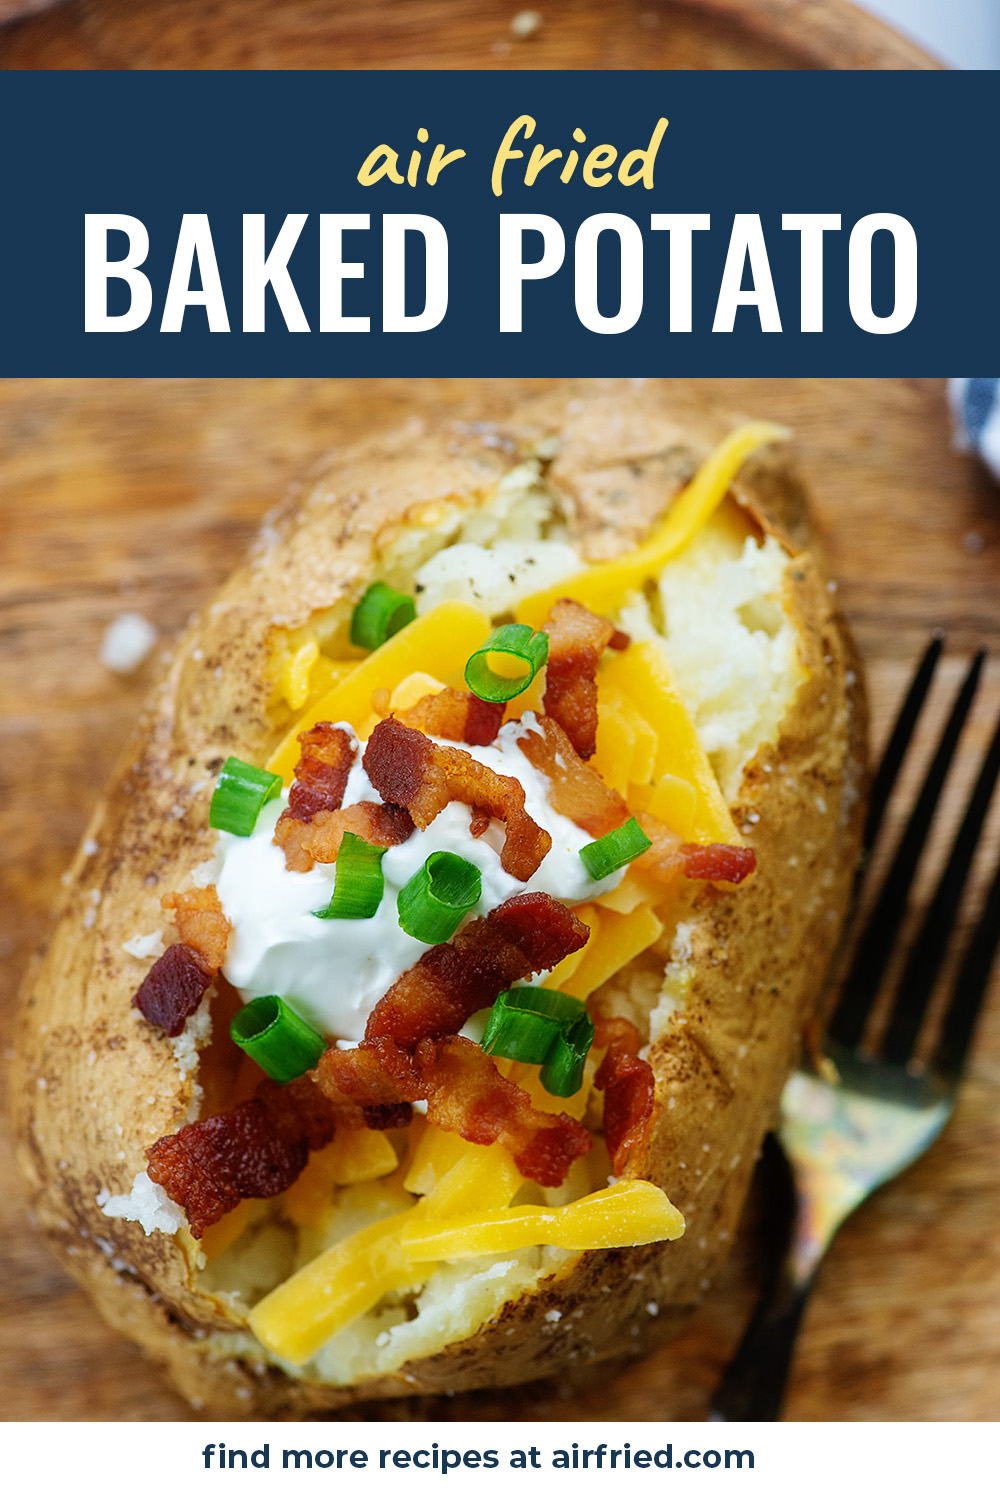 An overhead view of a loaded baked potato on a wooden cutting board.